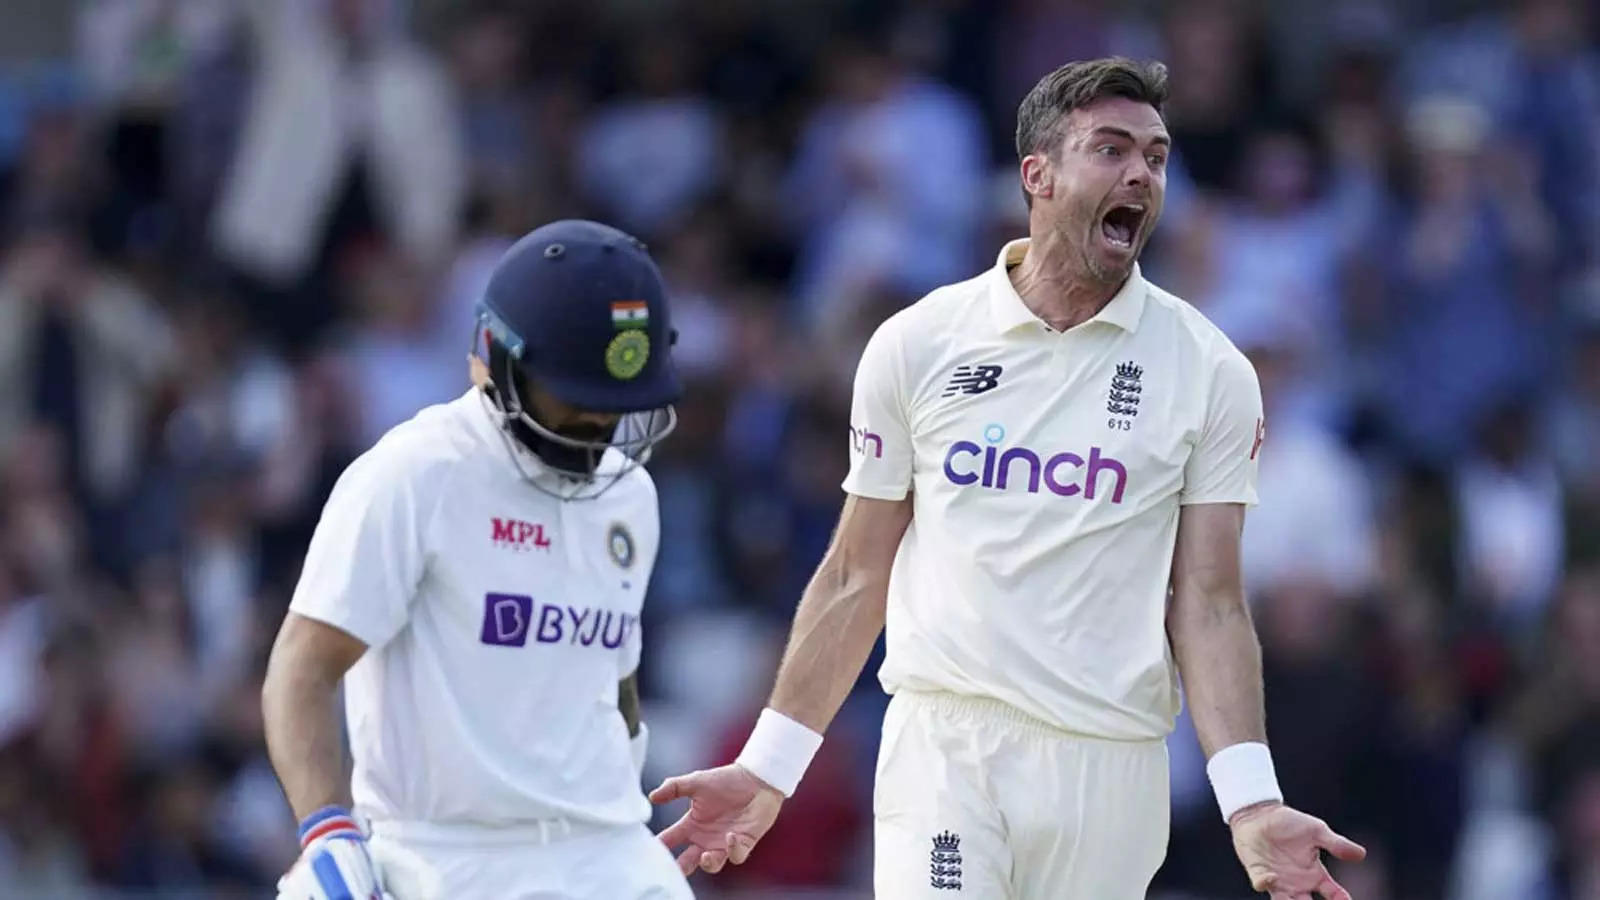 James Anderson and Virat Kohli could square-off at Edgbaston for one last time